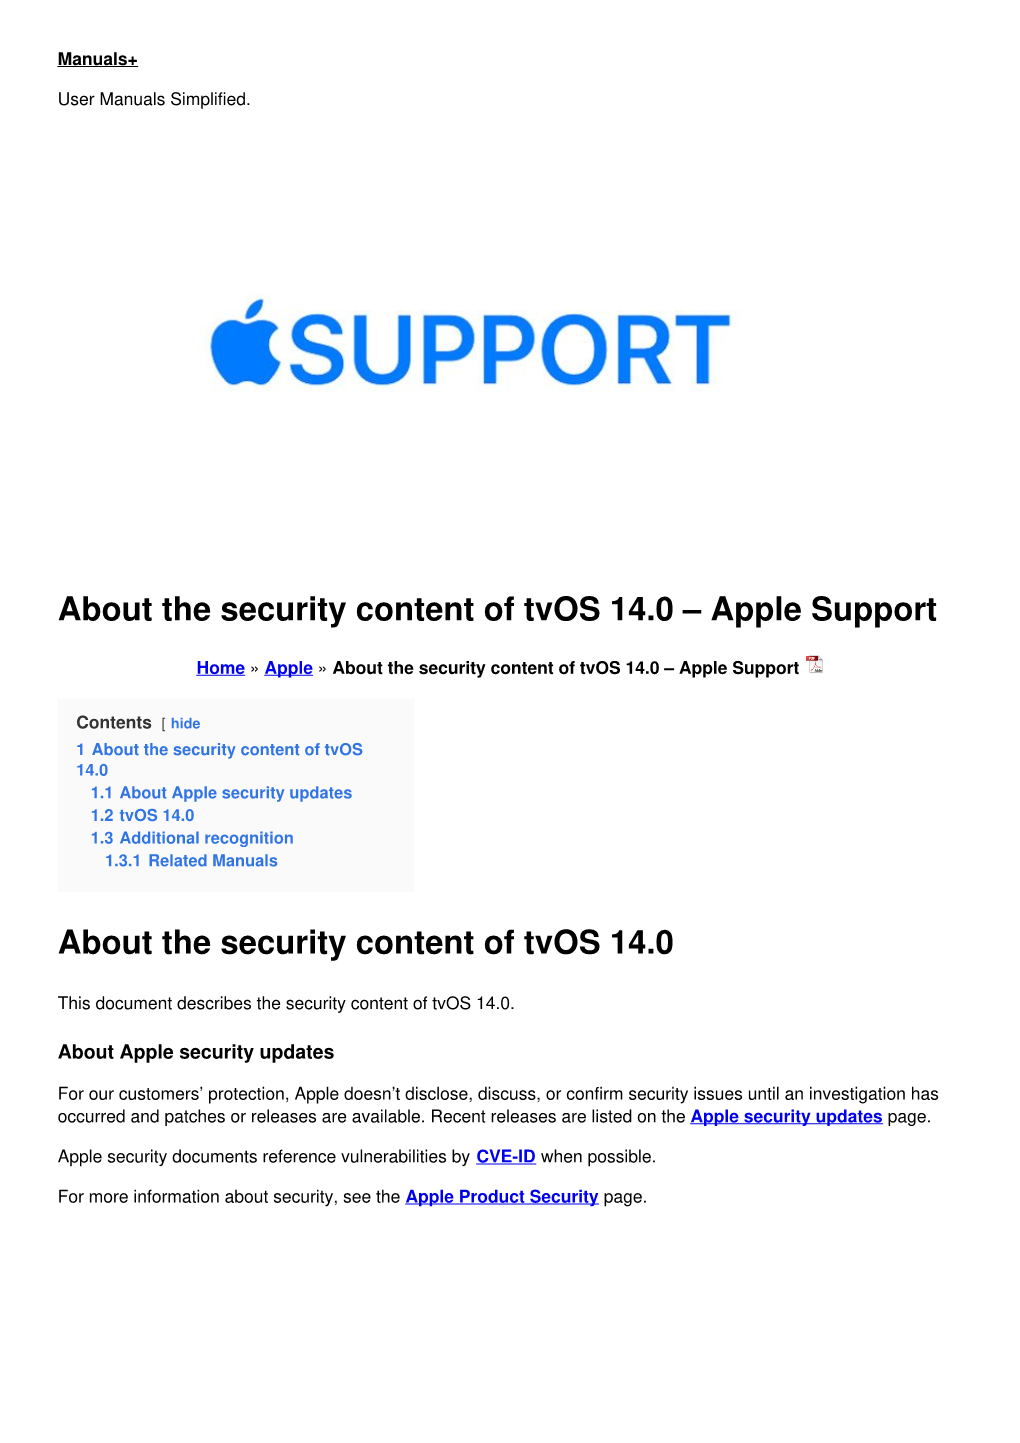 About the Security Content of Tvos 14.0 – Apple Support